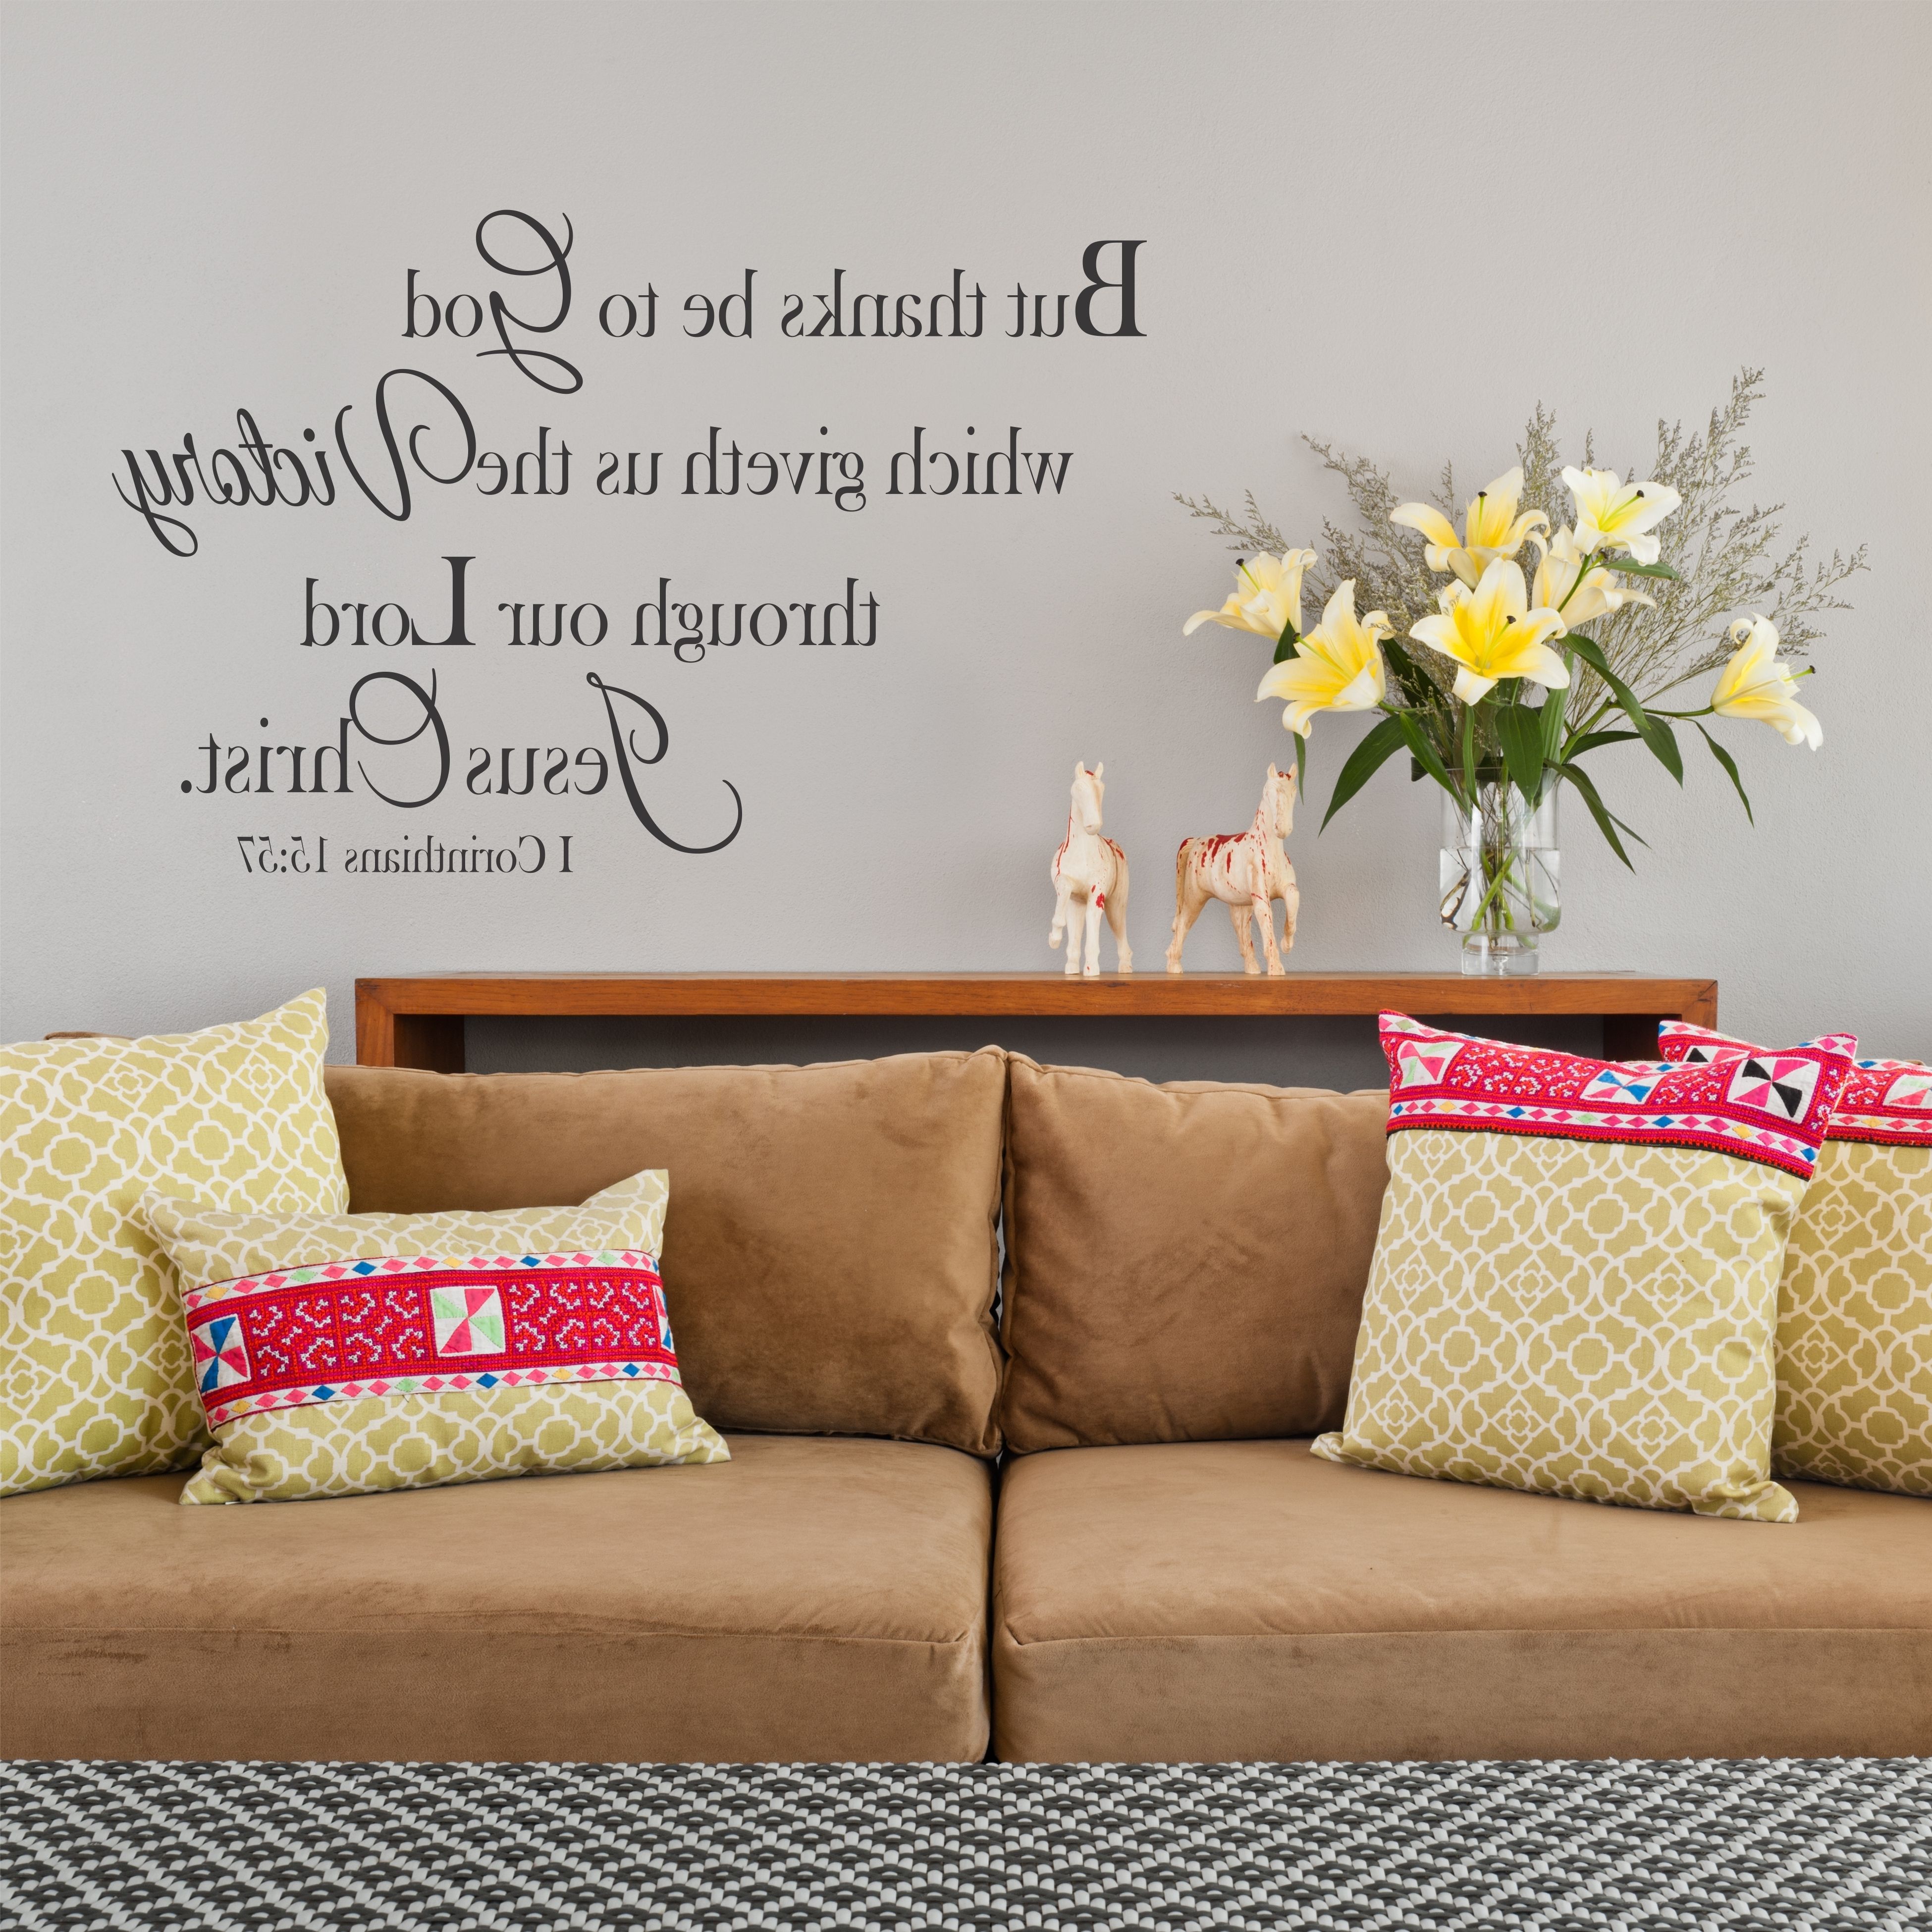 Most Current 1 Corinthians 13 Wall Art Throughout 1 Corinthians 15:57 – But Thanks Be To God / Wall Decal Kjv – A (View 6 of 15)